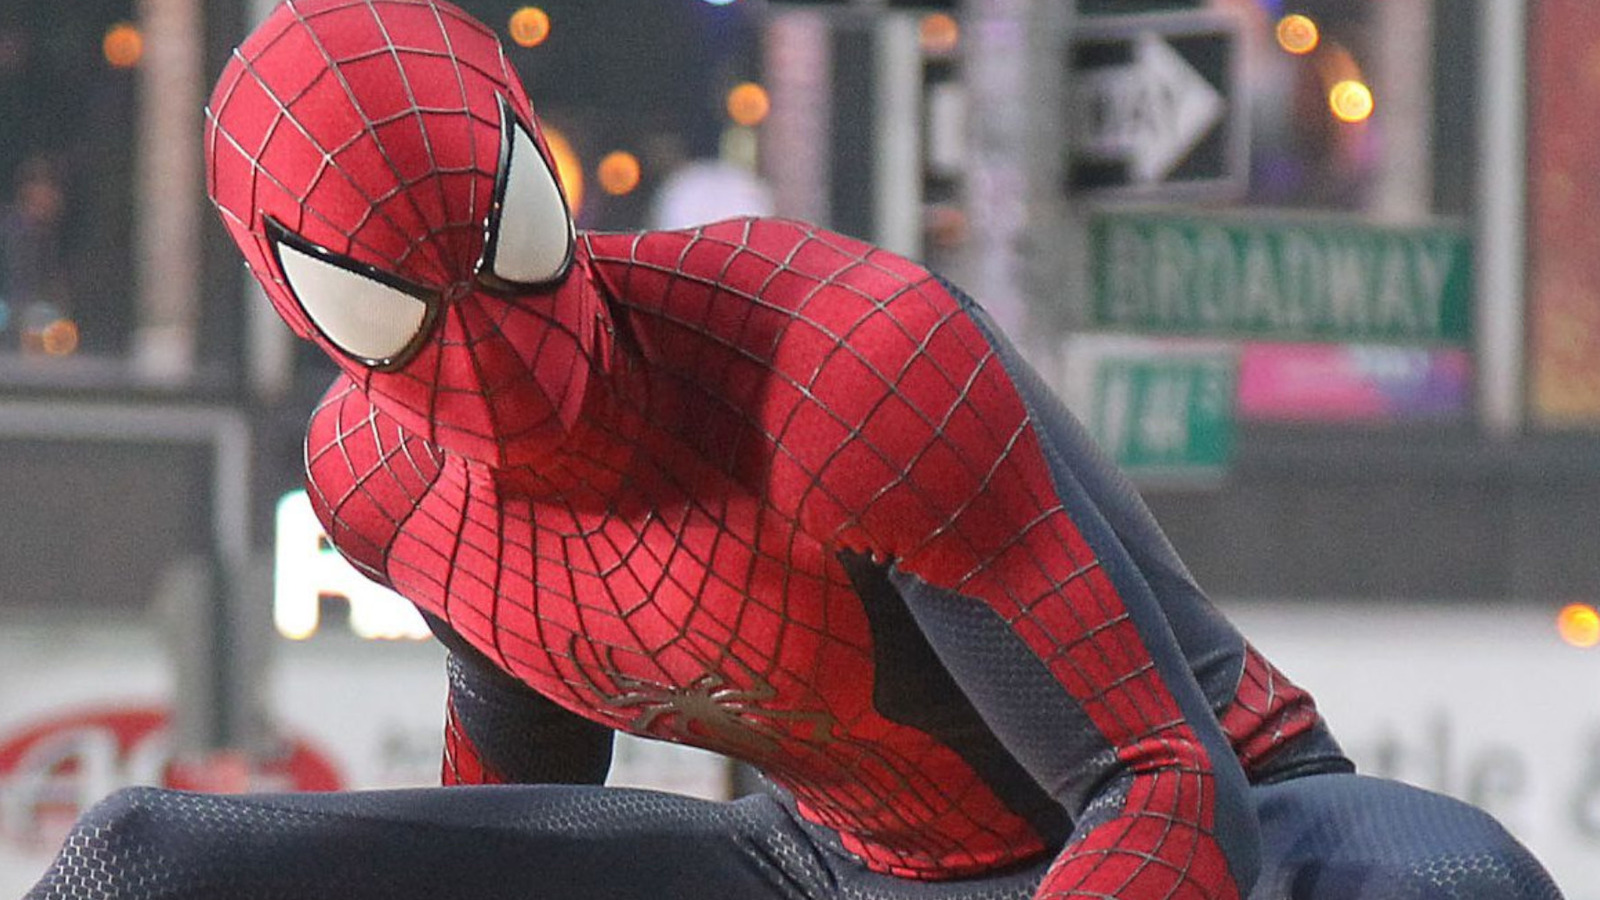 How Spider-Man: No Way Home Redeems The Amazing Spider-Man Movies